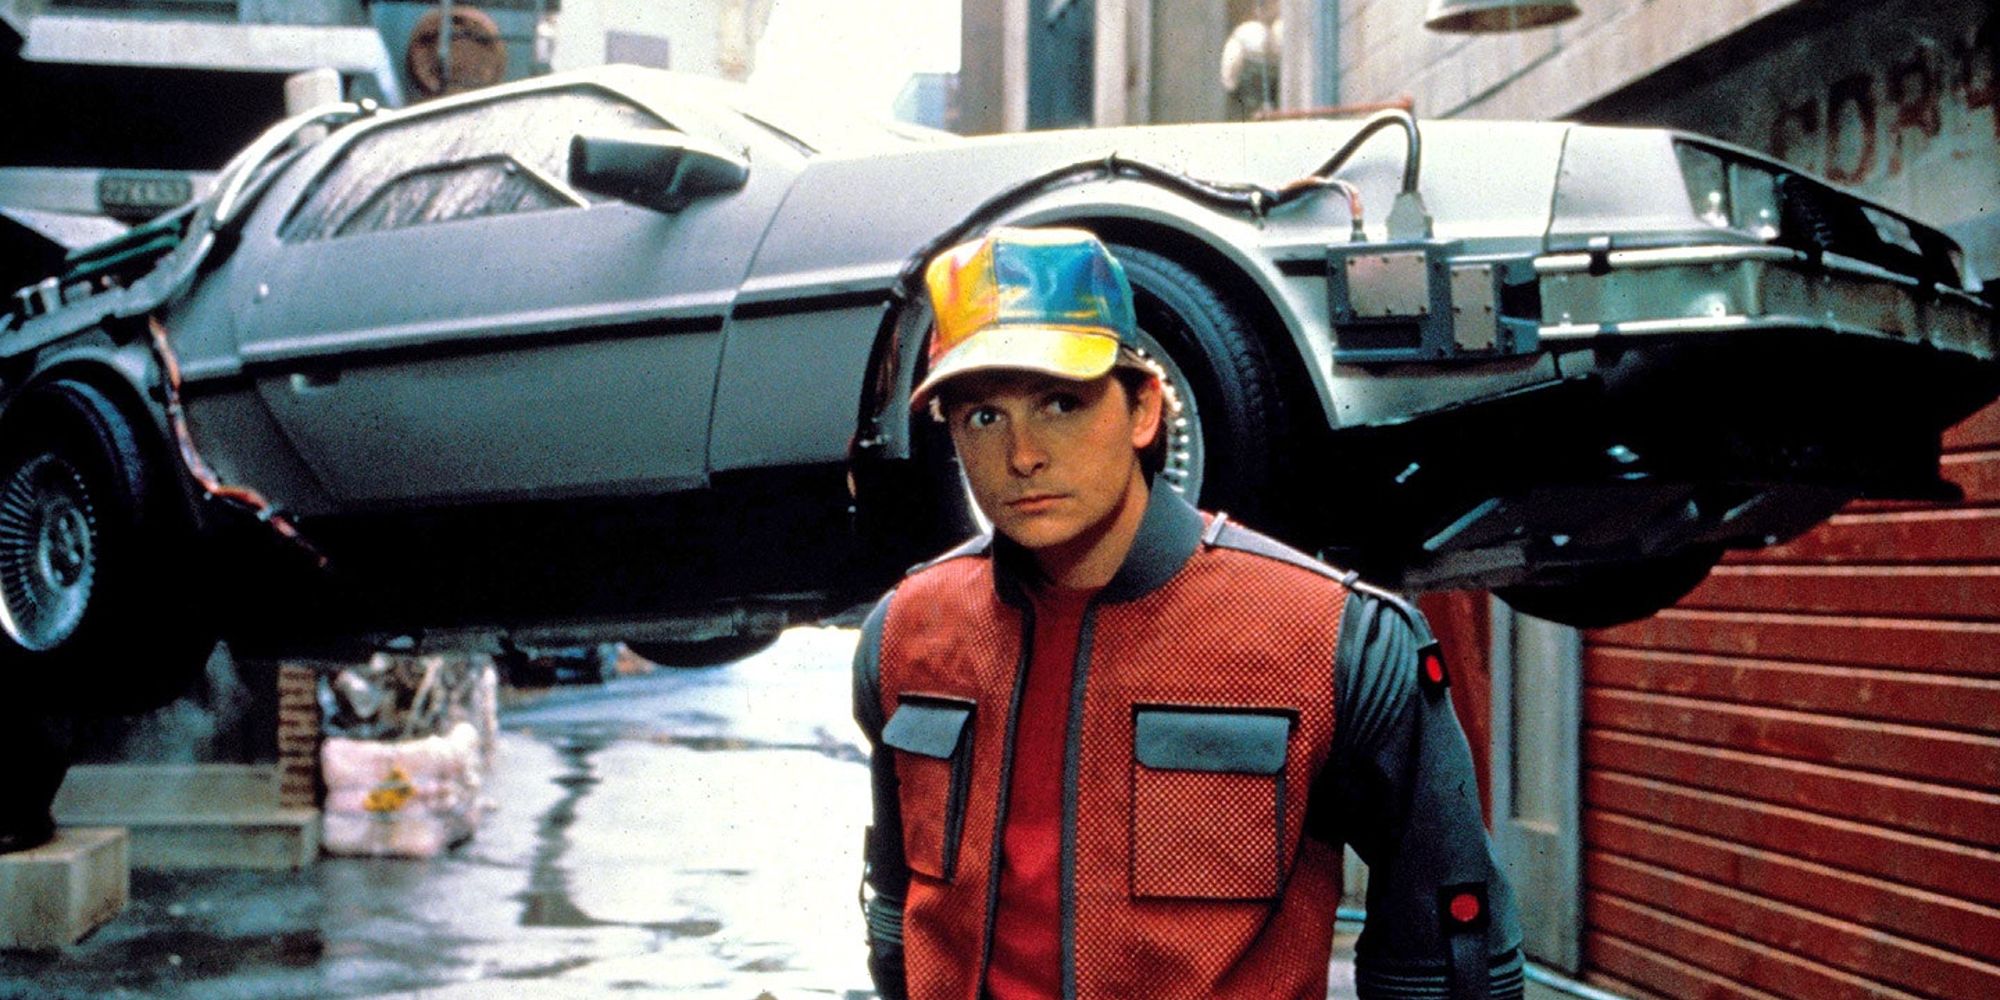 Marty McFly is standing before the flying DeLorean in Back to the Future Part II